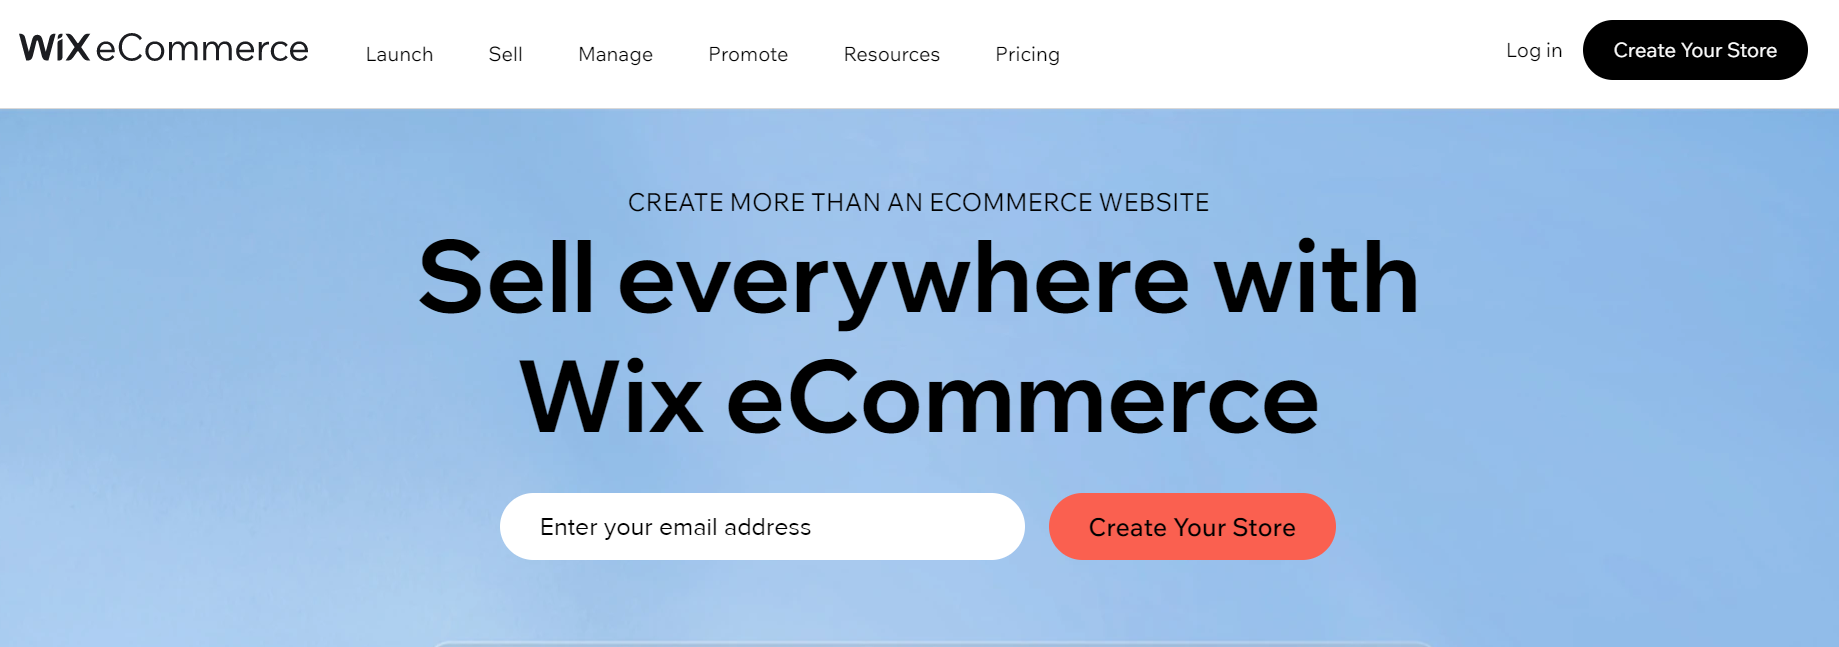 Wix is a one-in-all e-commerce platform perfect for small businesses, creatives, and complete beginners